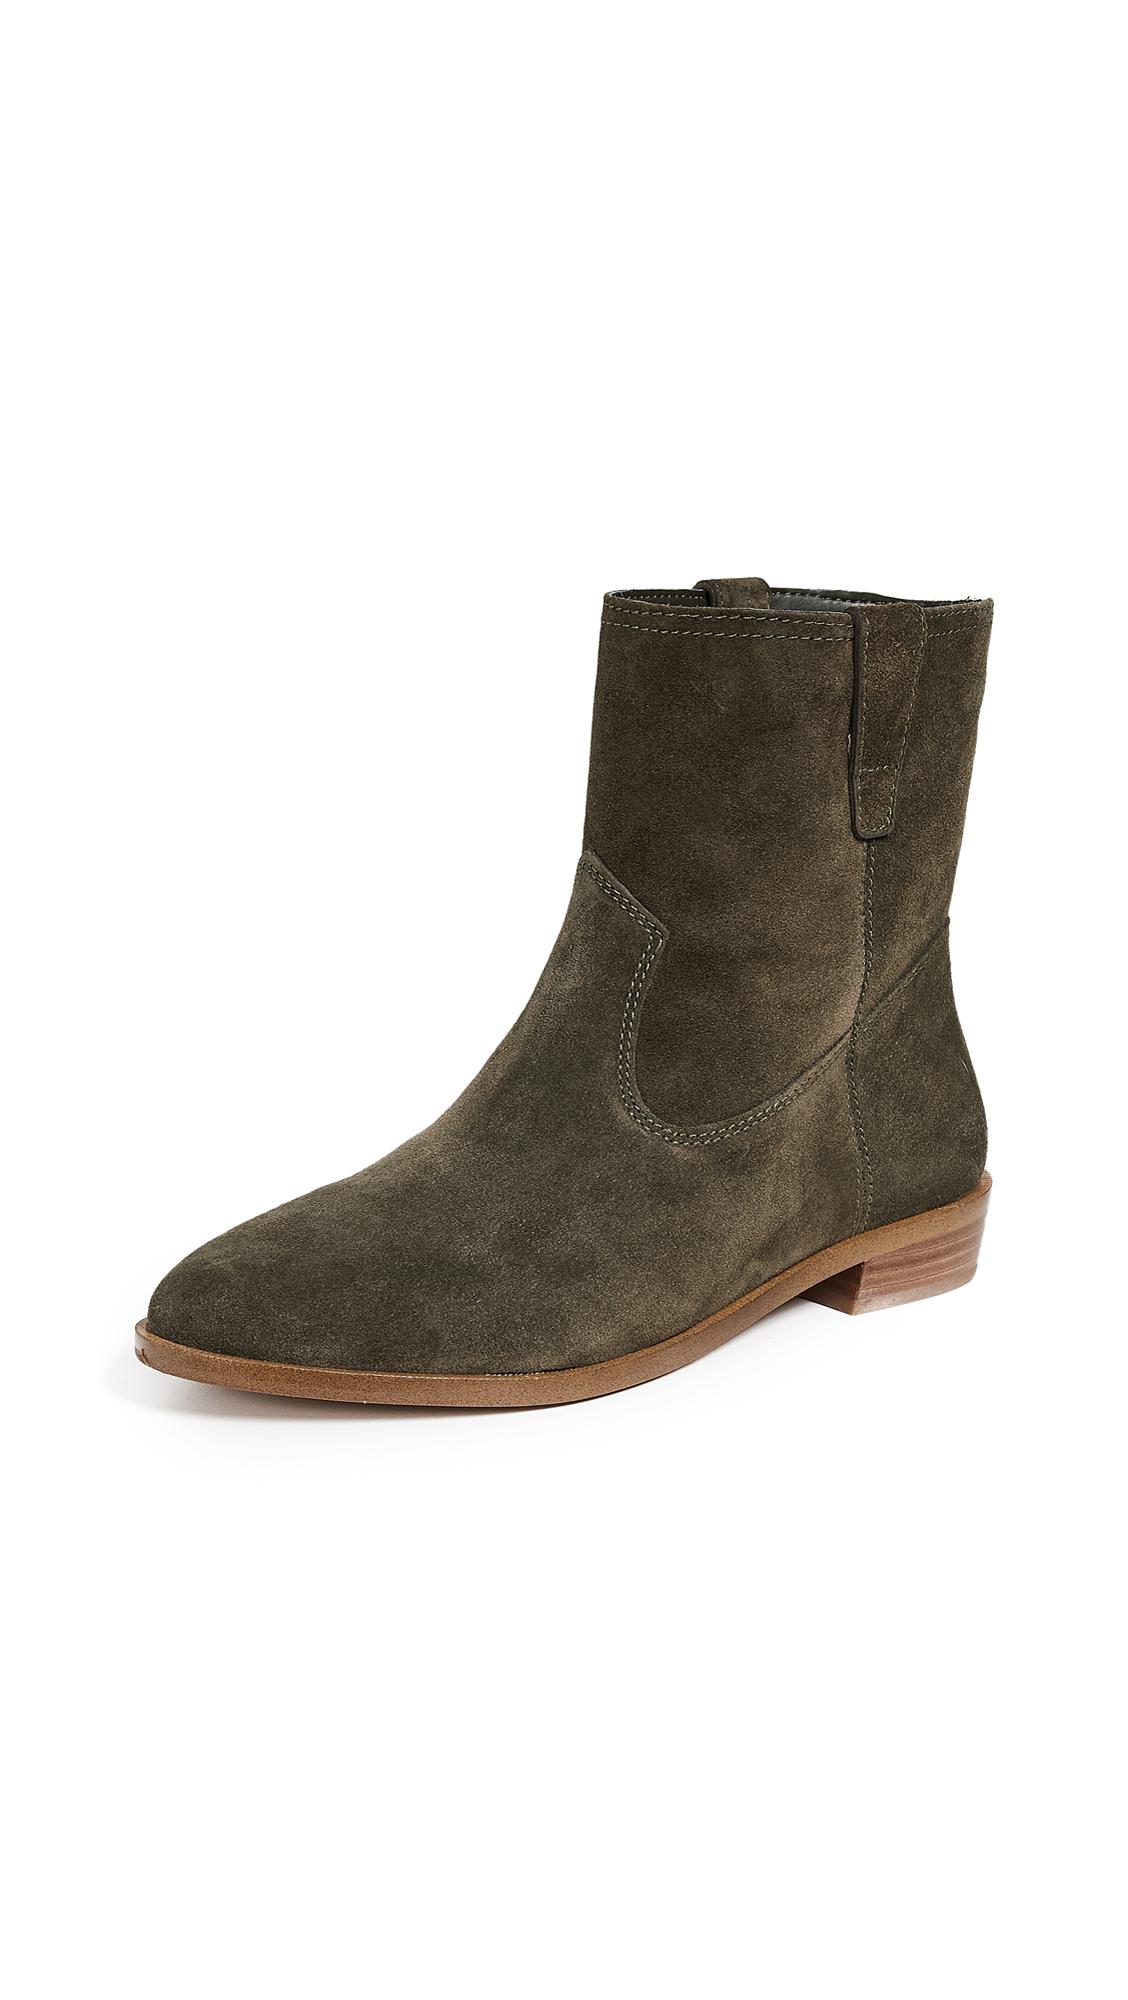 Rebecca Minkoff Suede Chasidy Boots in 